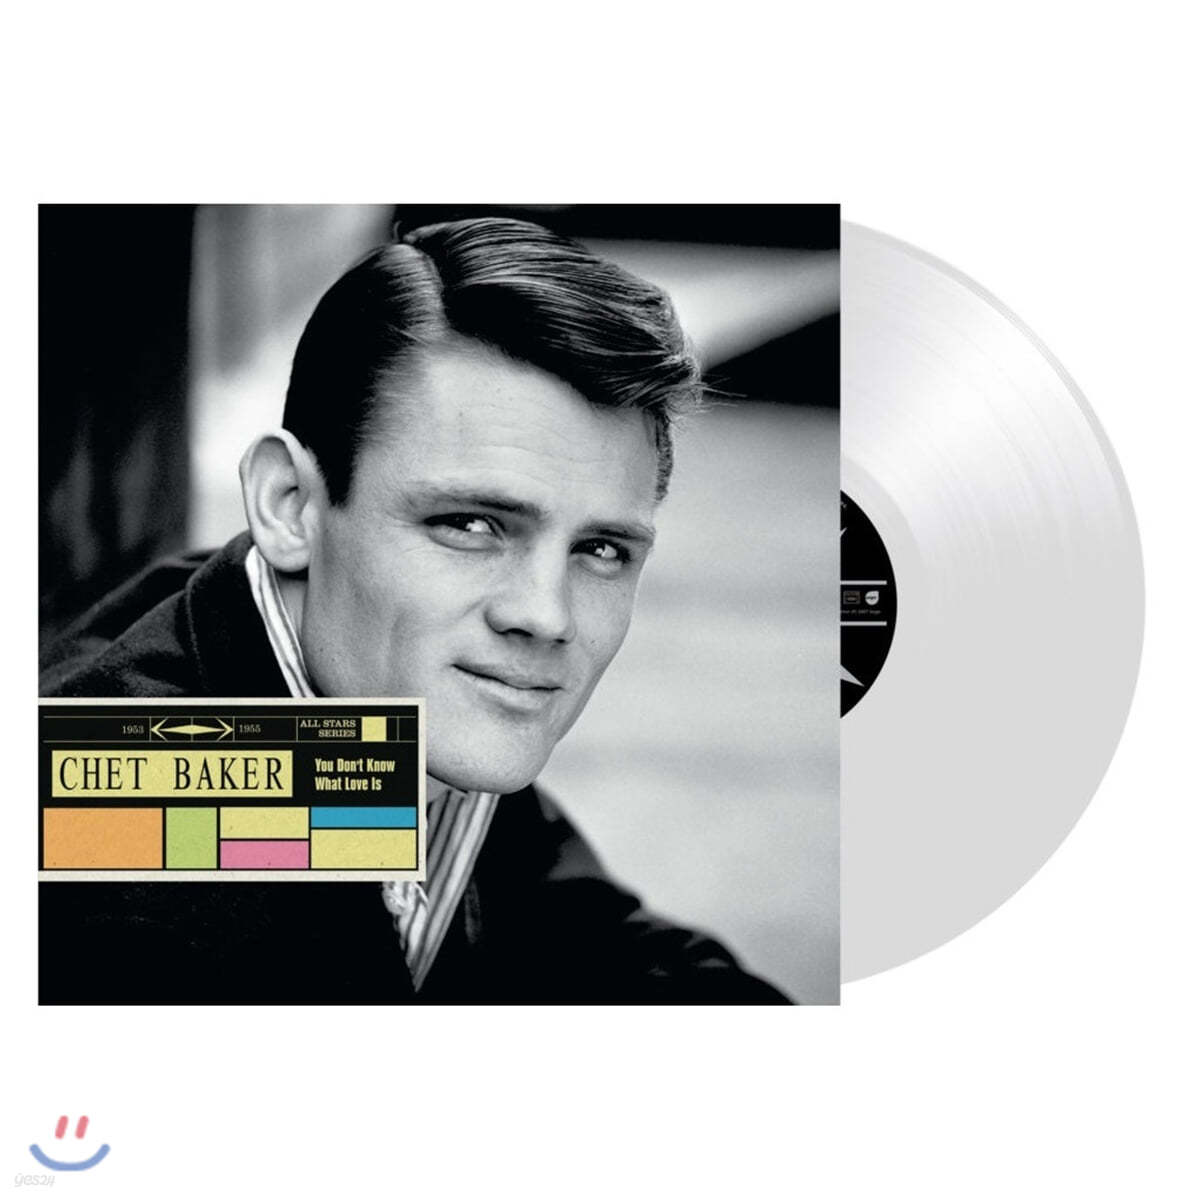 Chet Baker (쳇 베이커) - You Don’t Know What Love Is [투명 컬러 LP] 